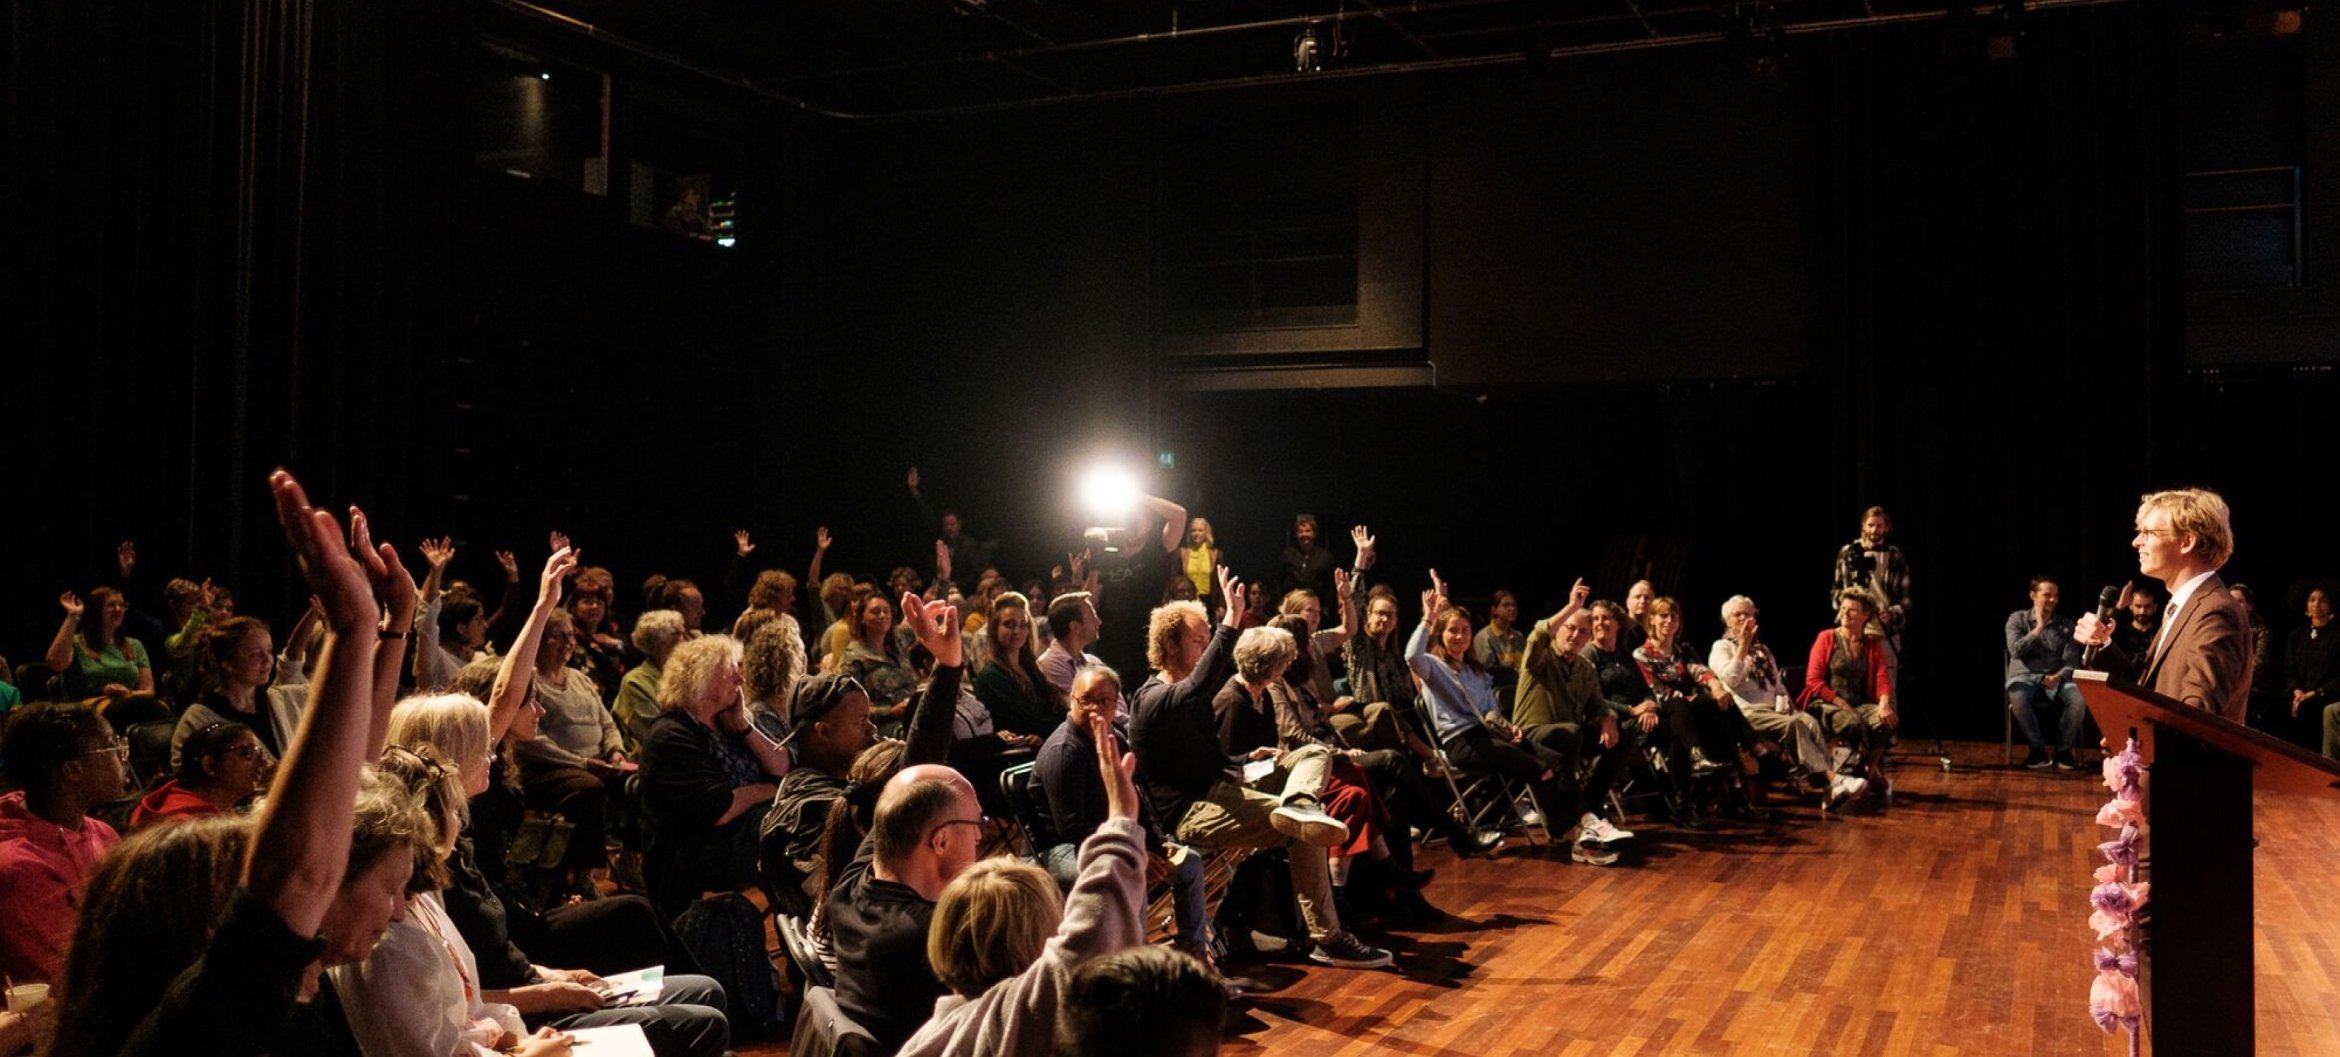 Inclusive theatre symposium: a day full of action!